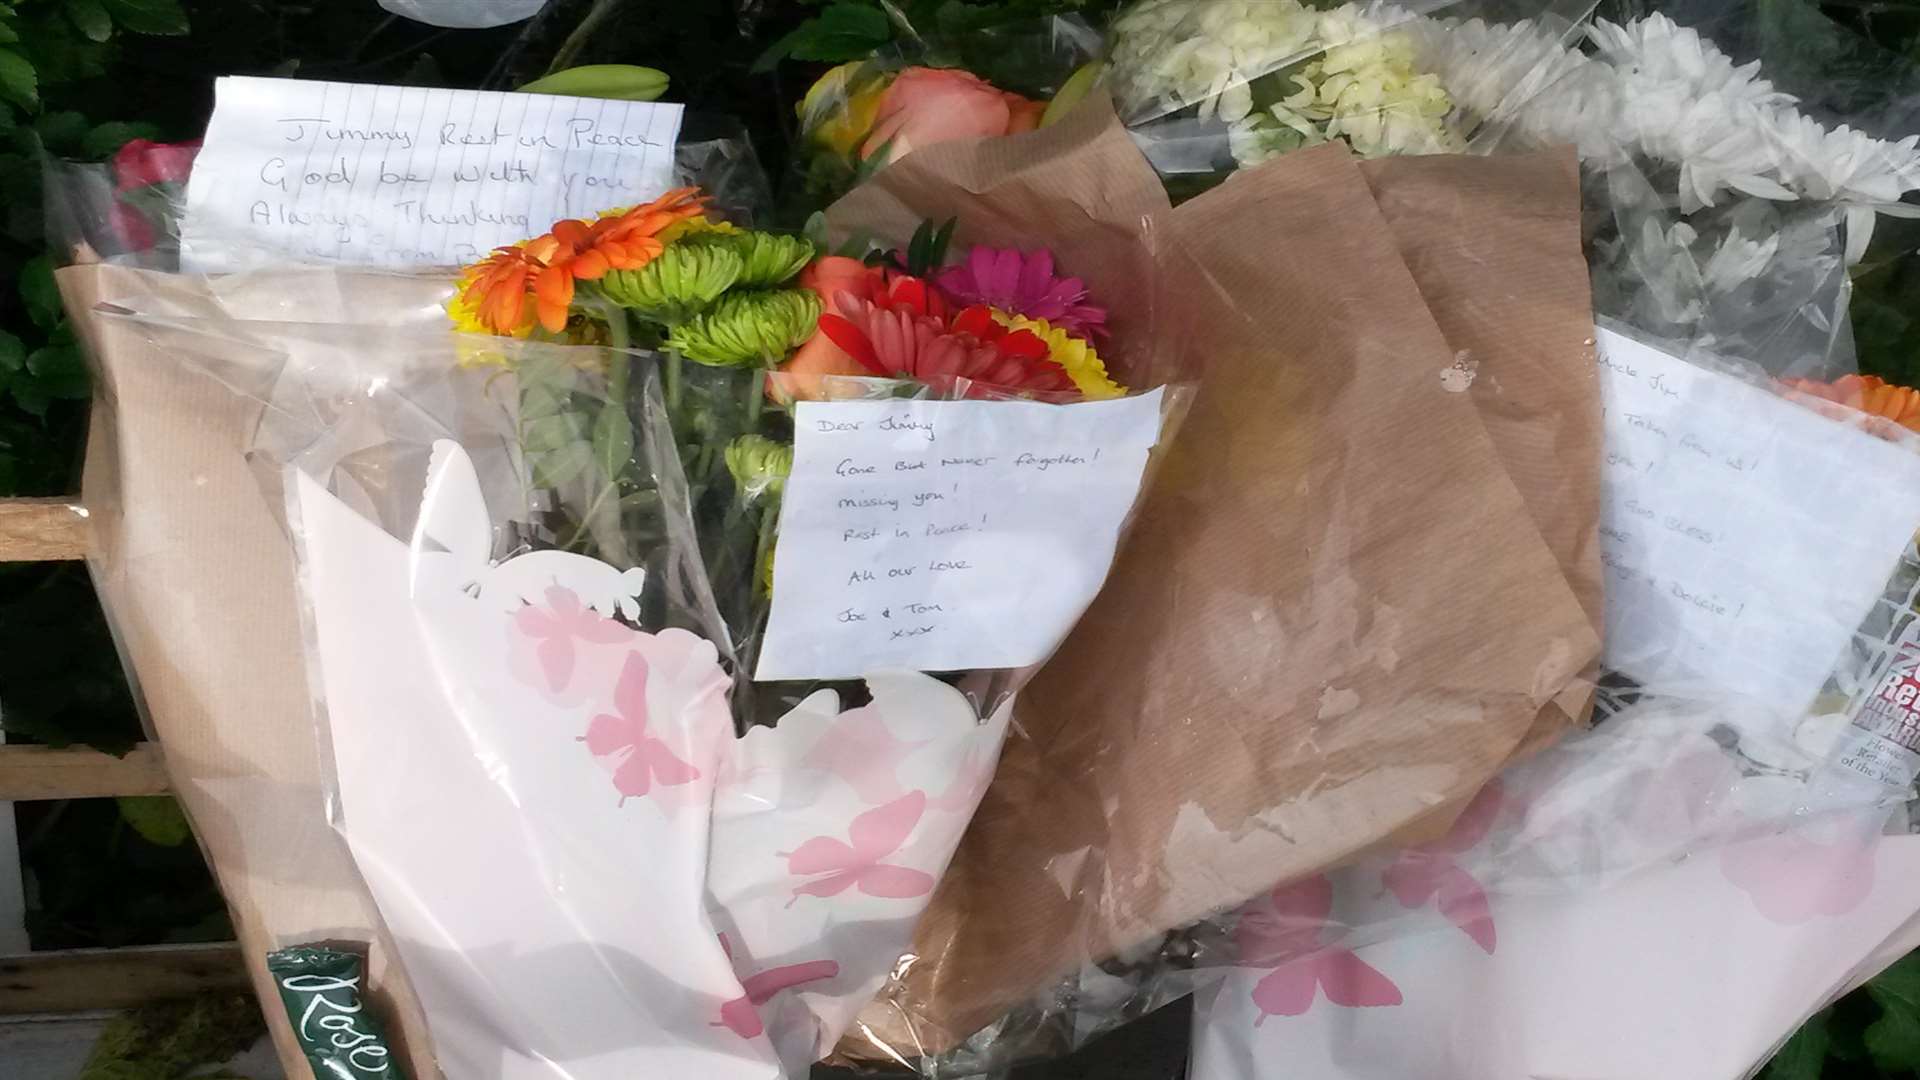 Floral tributes left a the site where Mr Breaker used to sell fruit and veg